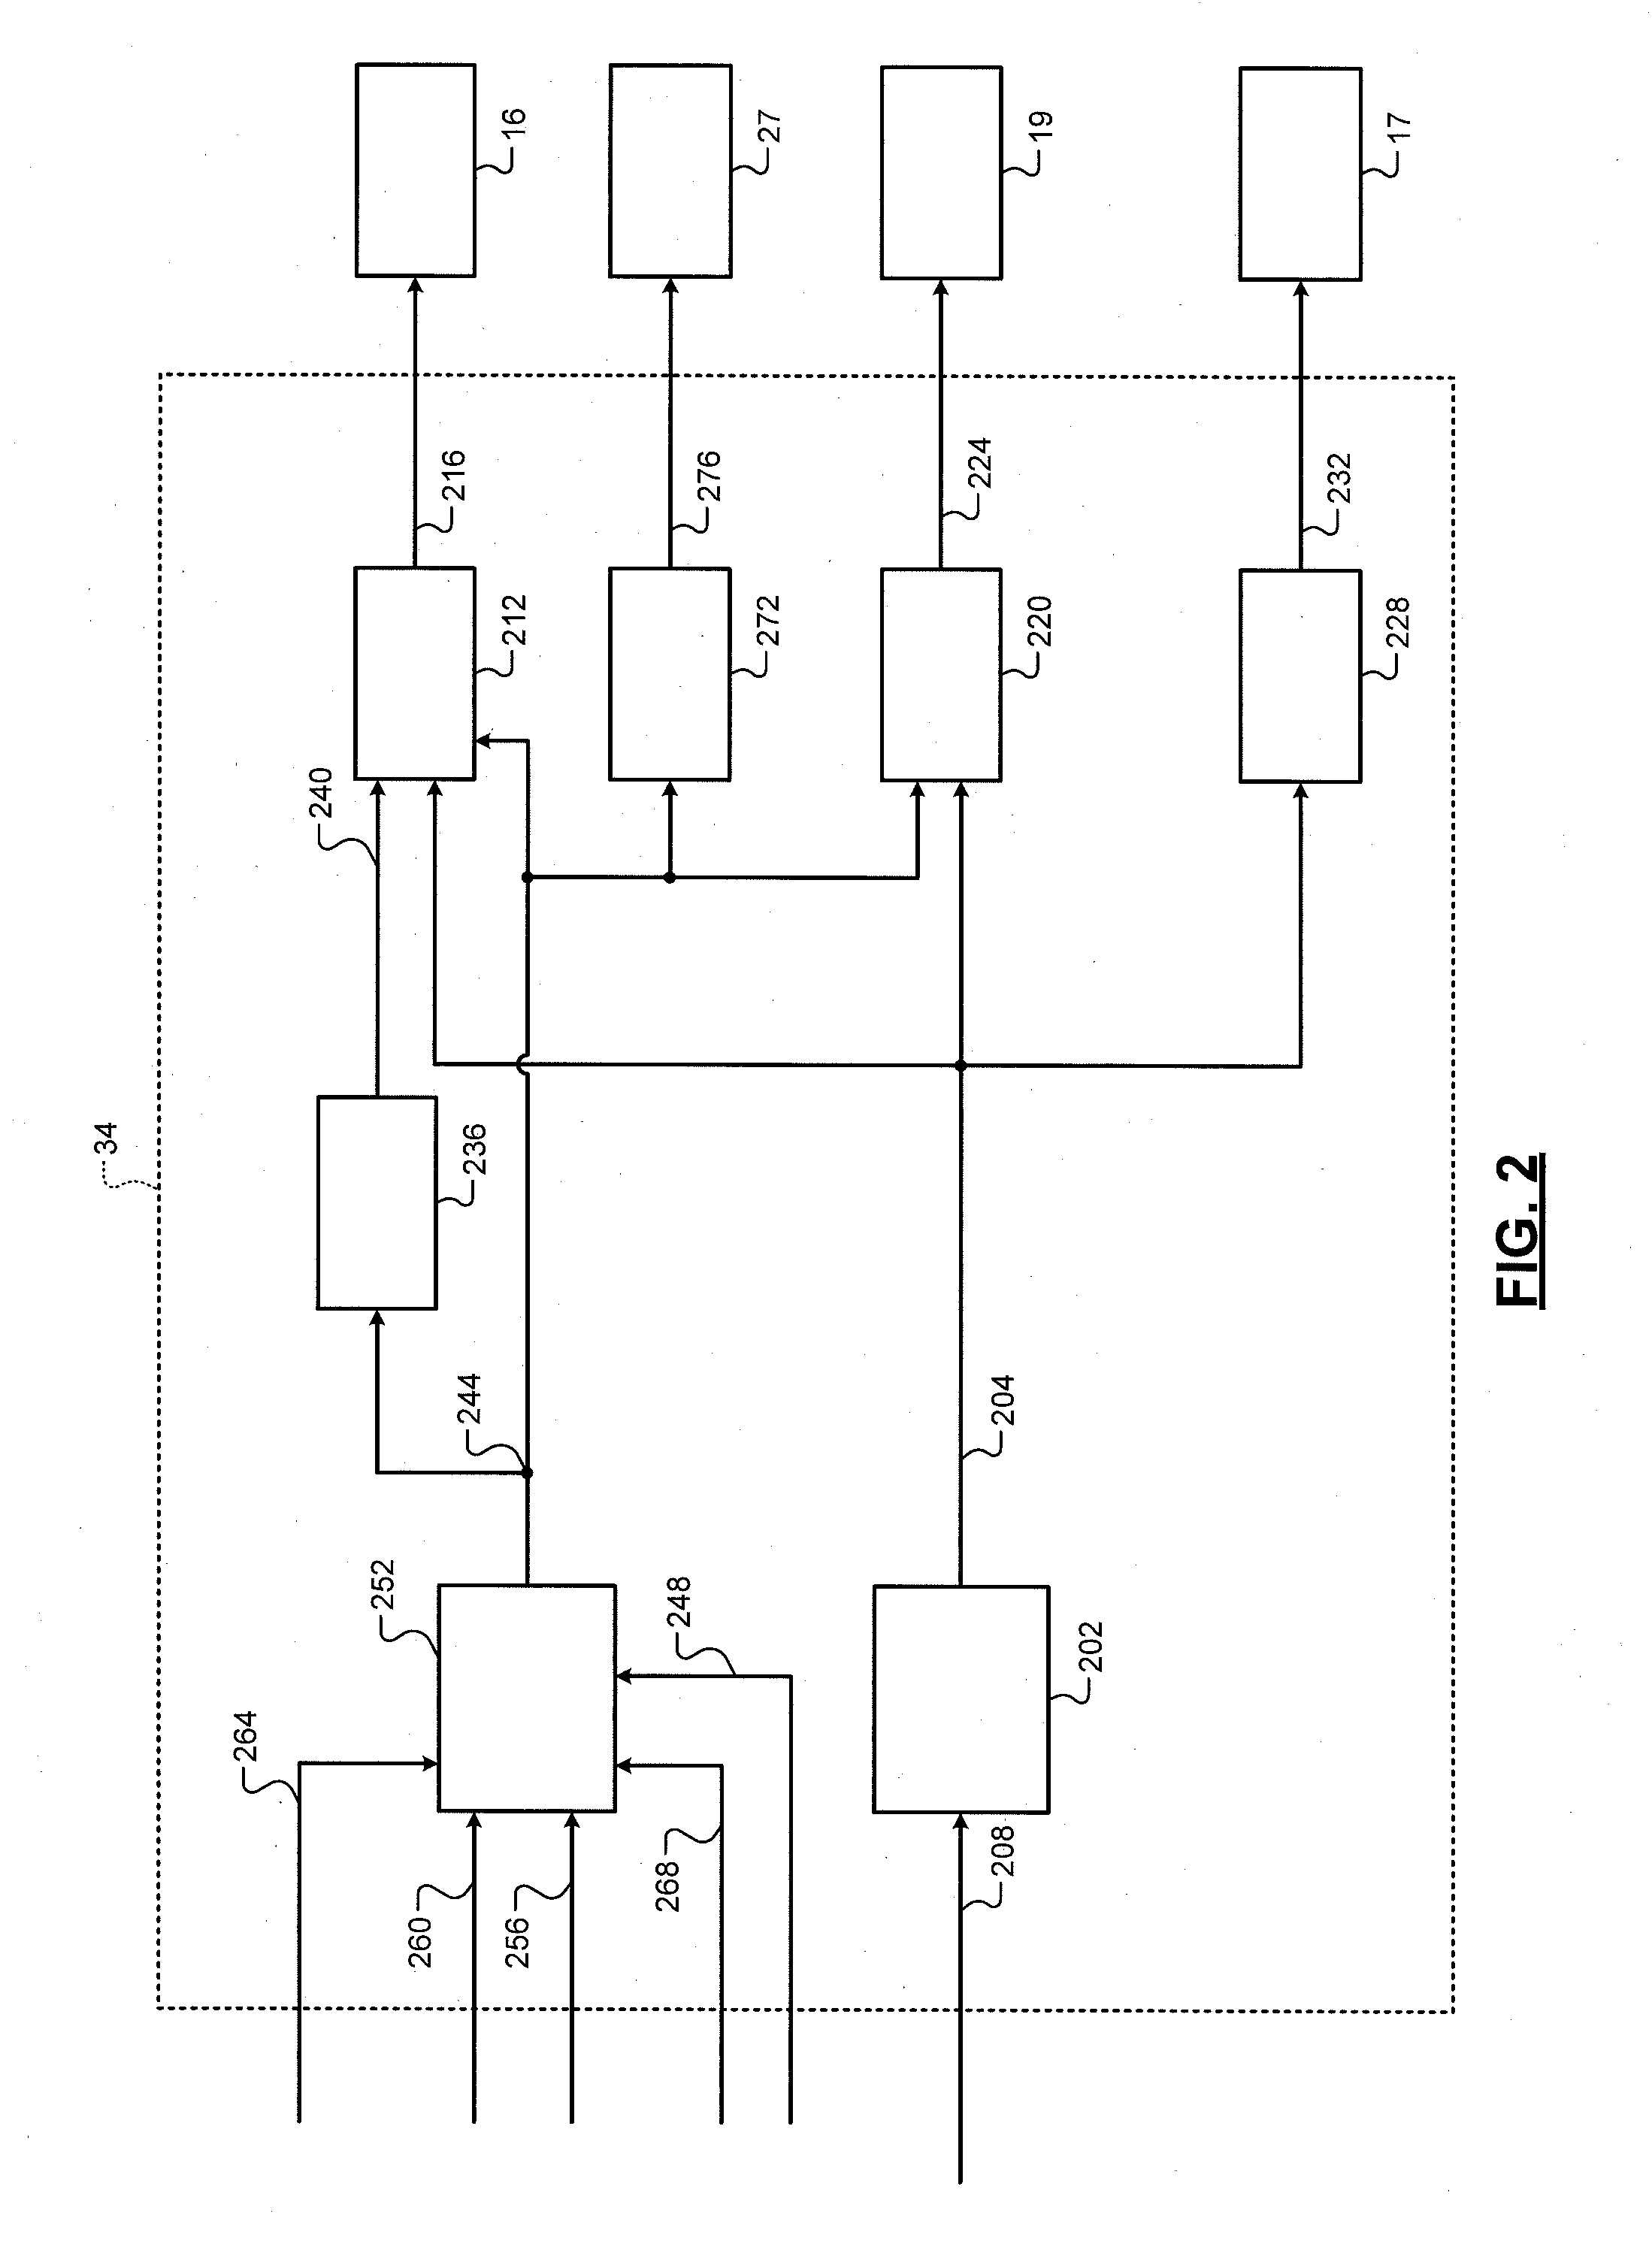 Exhaust gas recirculation control systems and methods for low engine delta pressure conditions